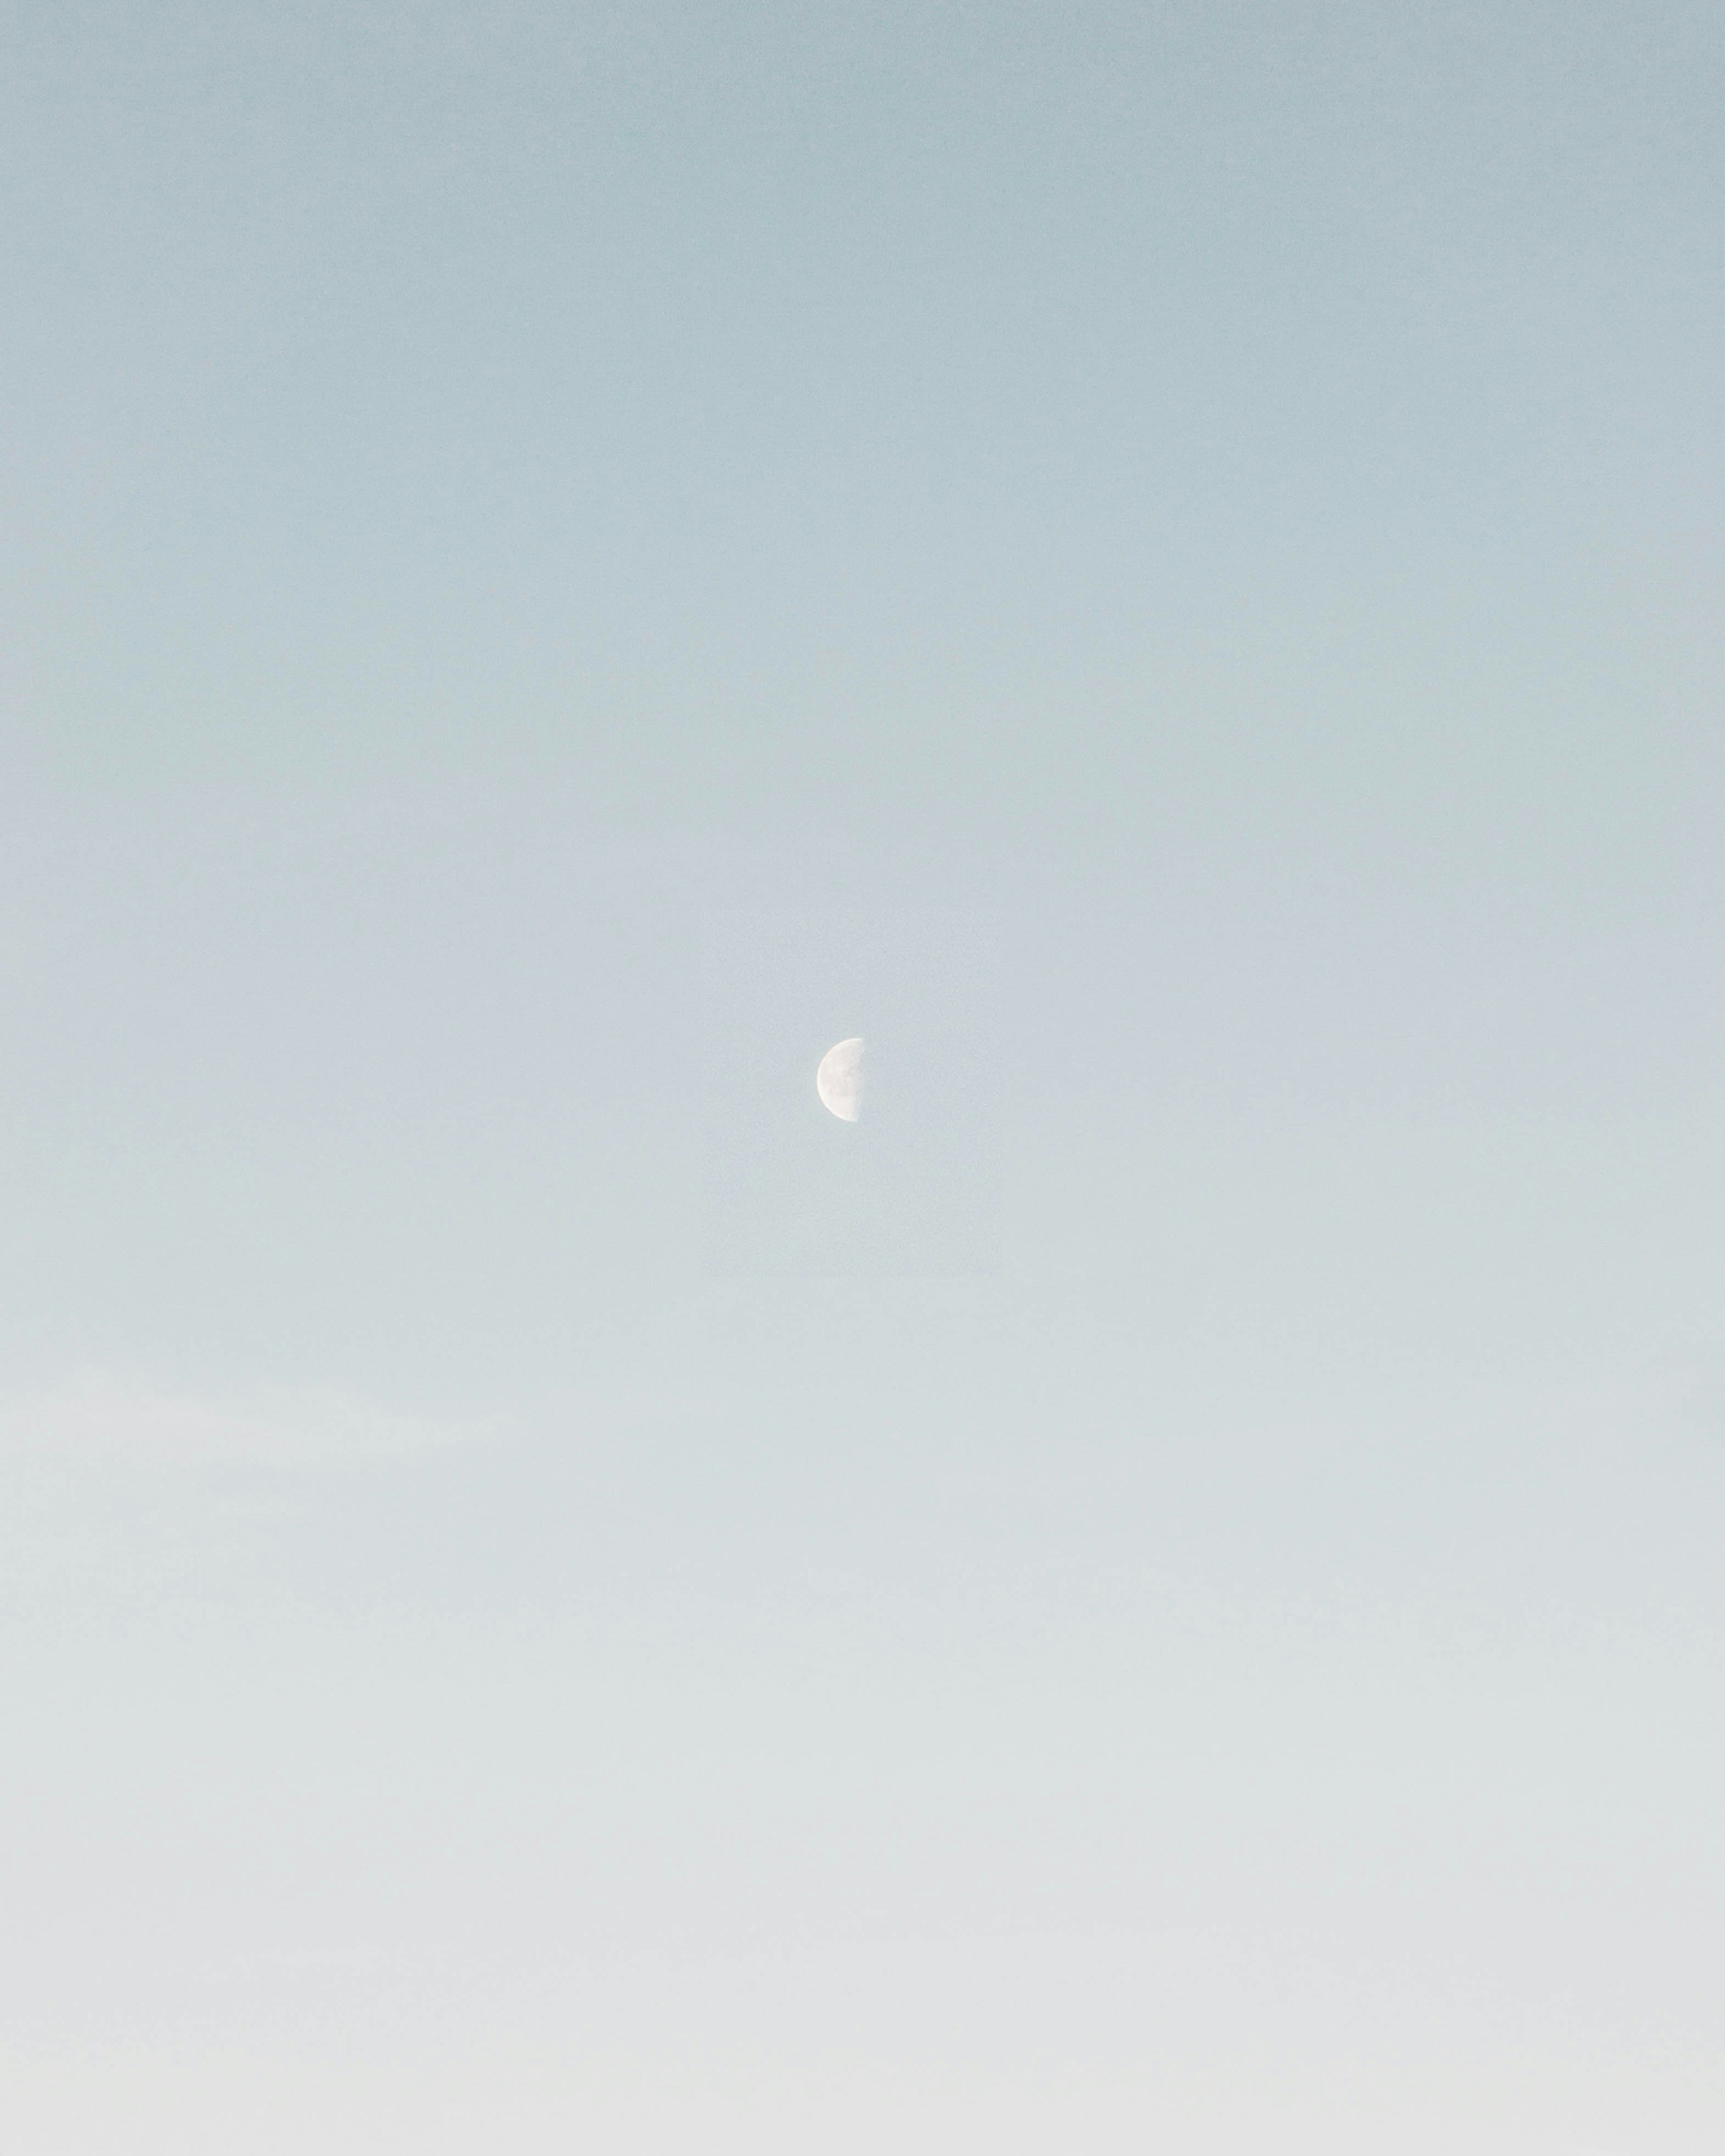 photo of half-moon during daytime